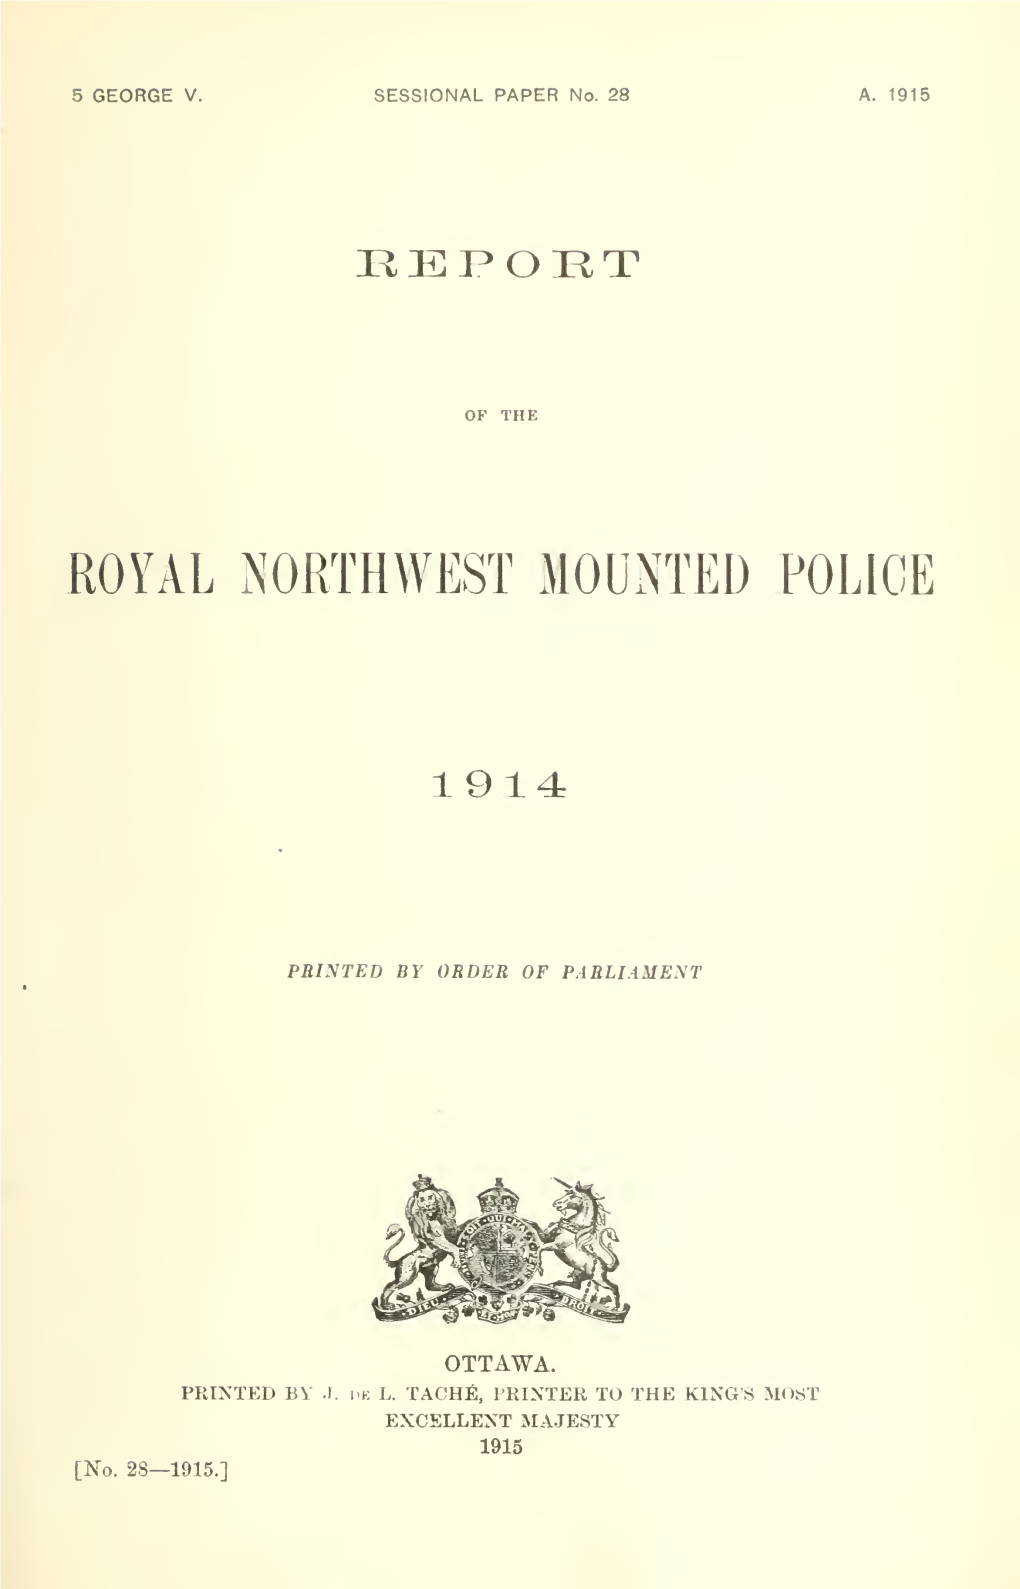 Report of the Royal Northwest Mounted Police, 1914